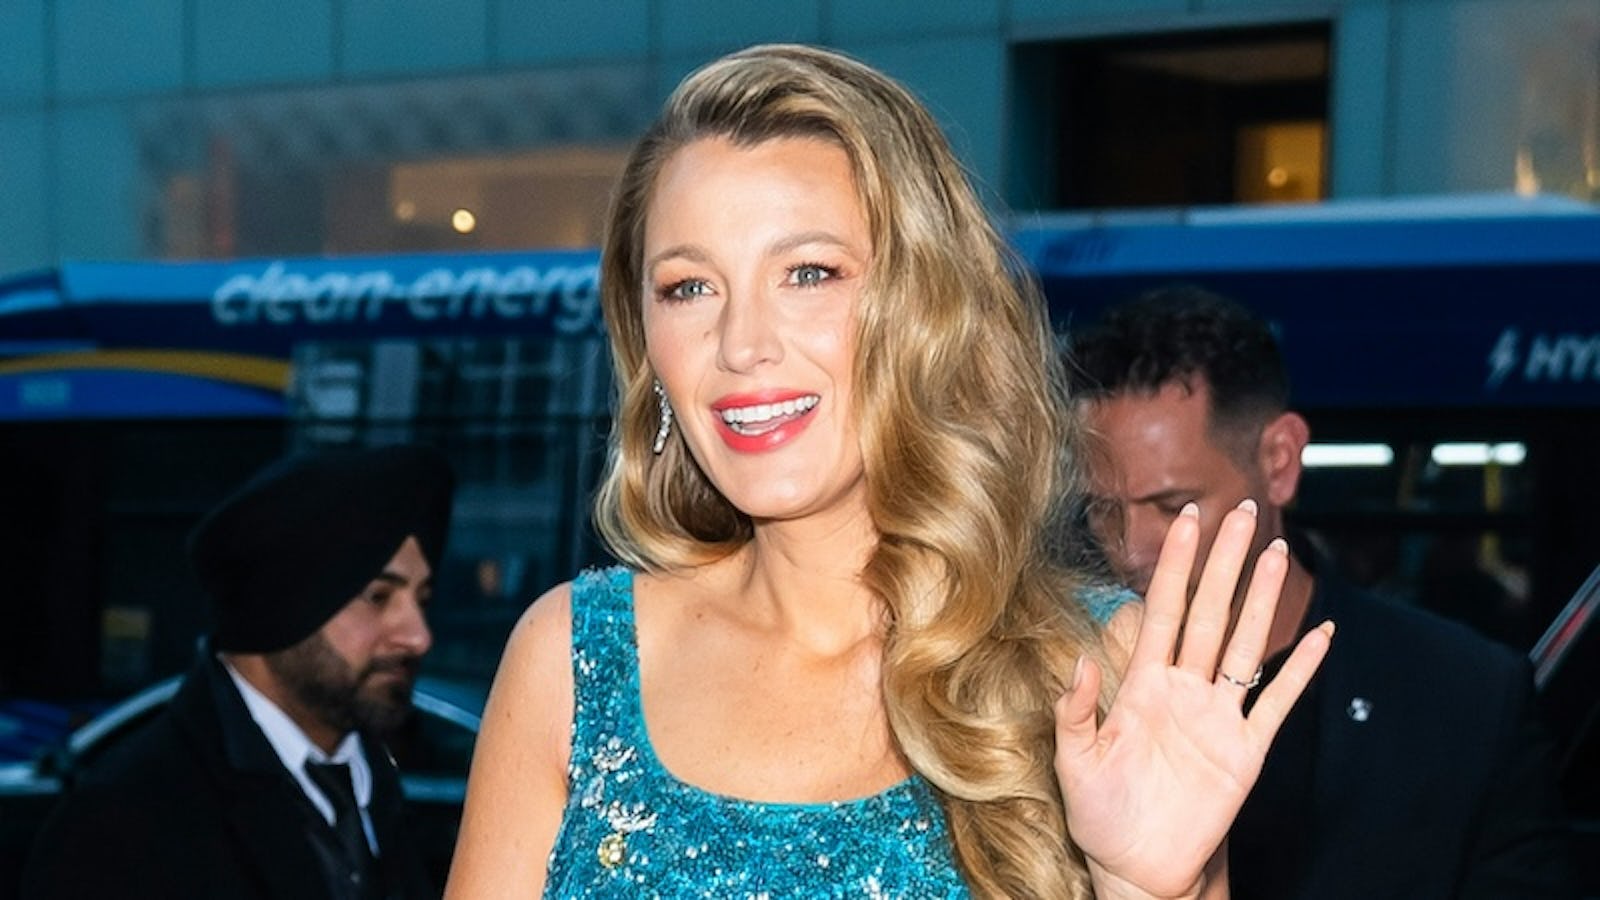 Blake Lively wears sparkly blue dress for Tiffany event